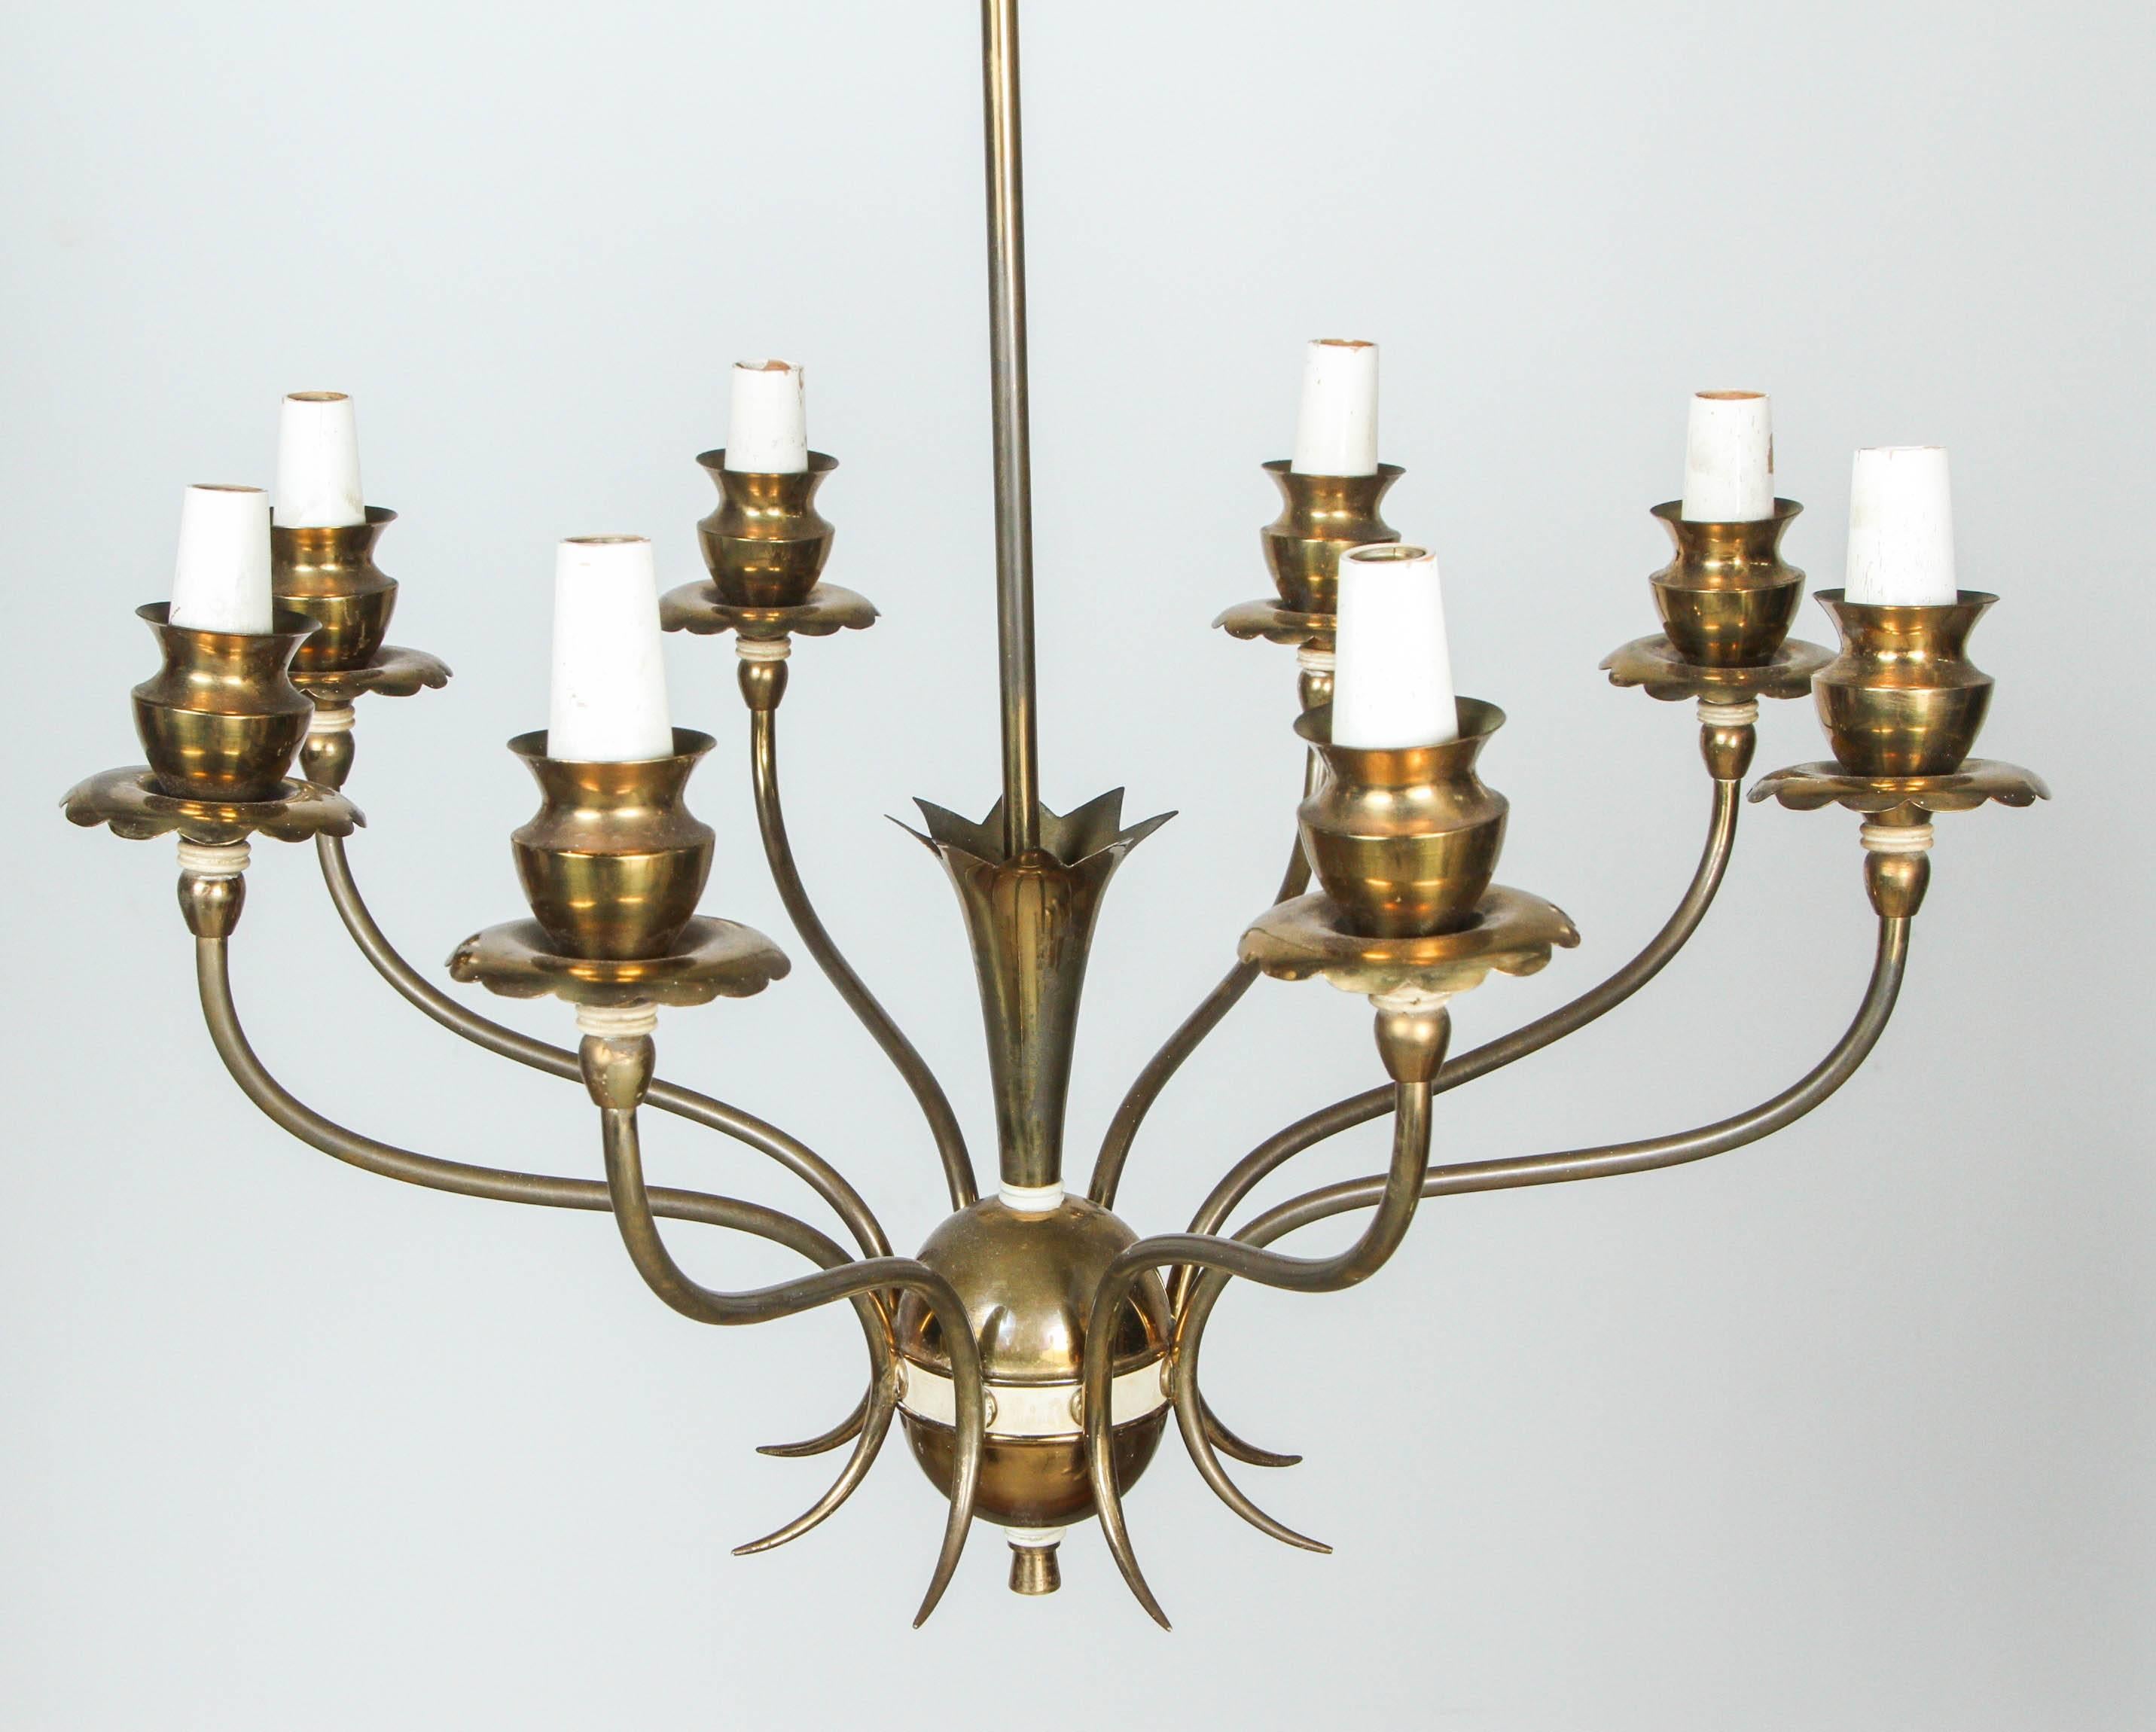 Italian brass chandelier with eight arms and flower details.